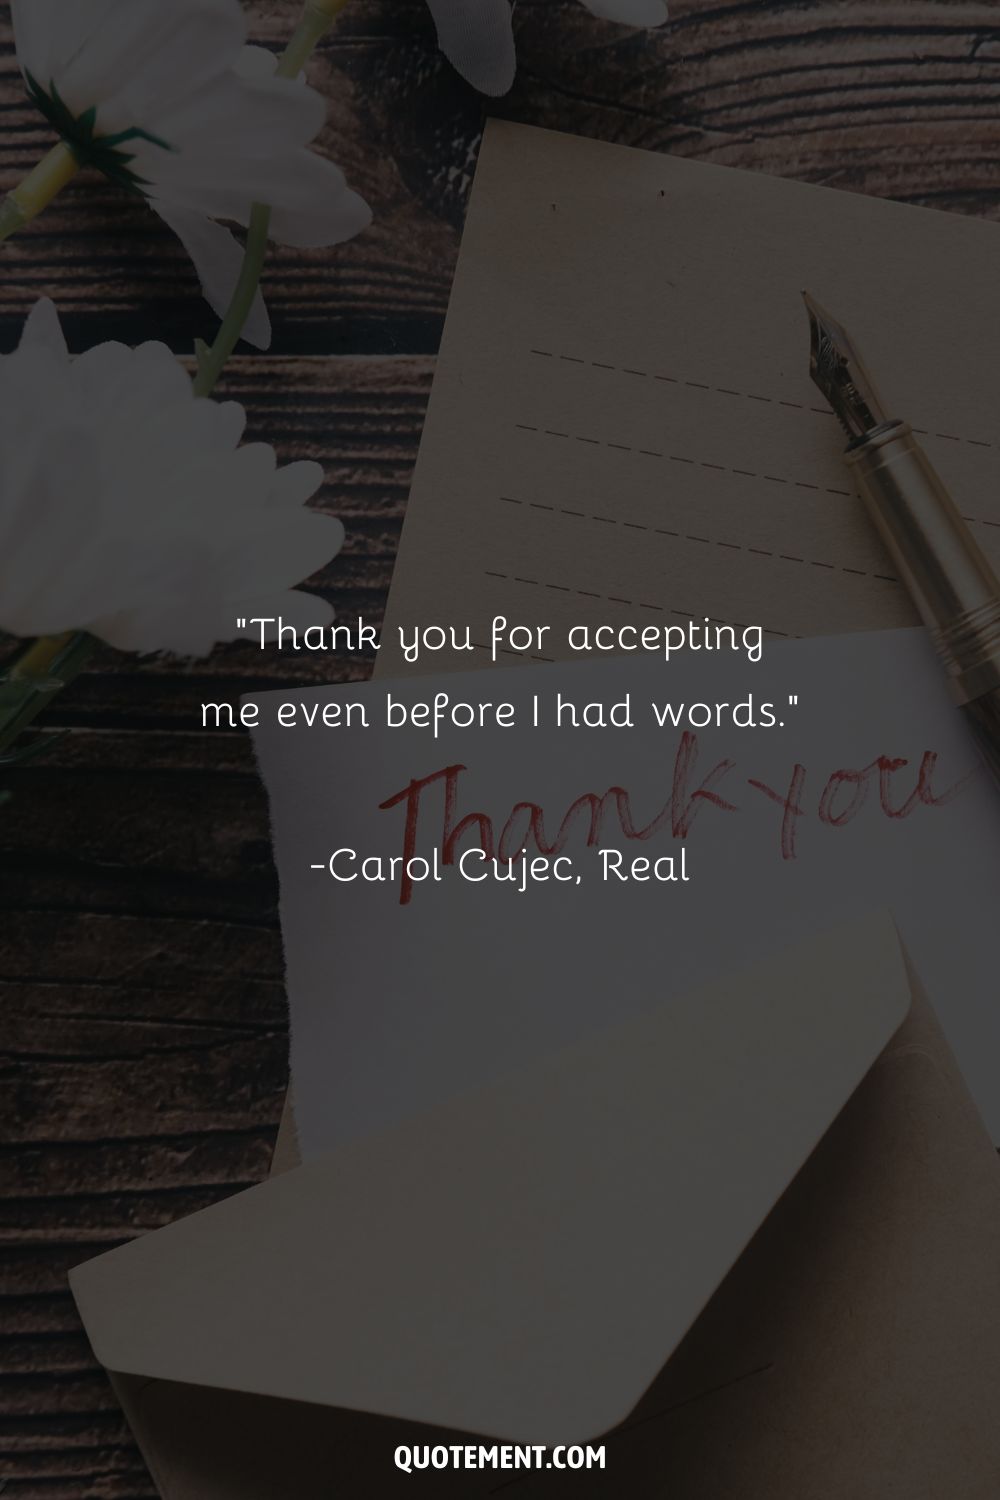 Thank you for accepting me even before I had words.